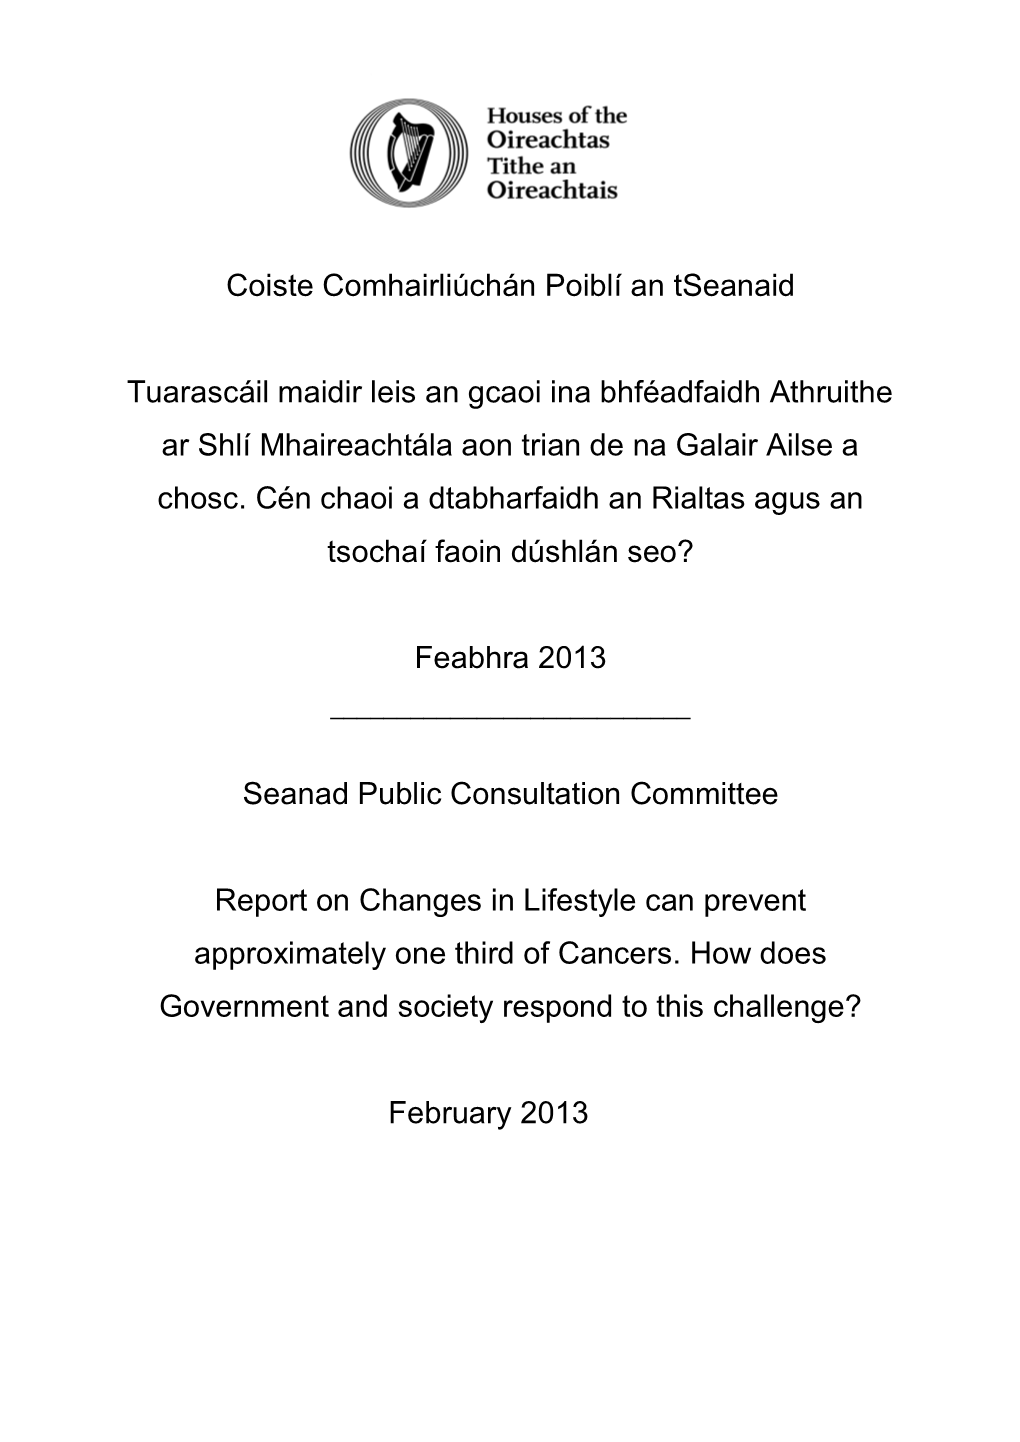 Oireachtas Library & Research Service Internal Document Template